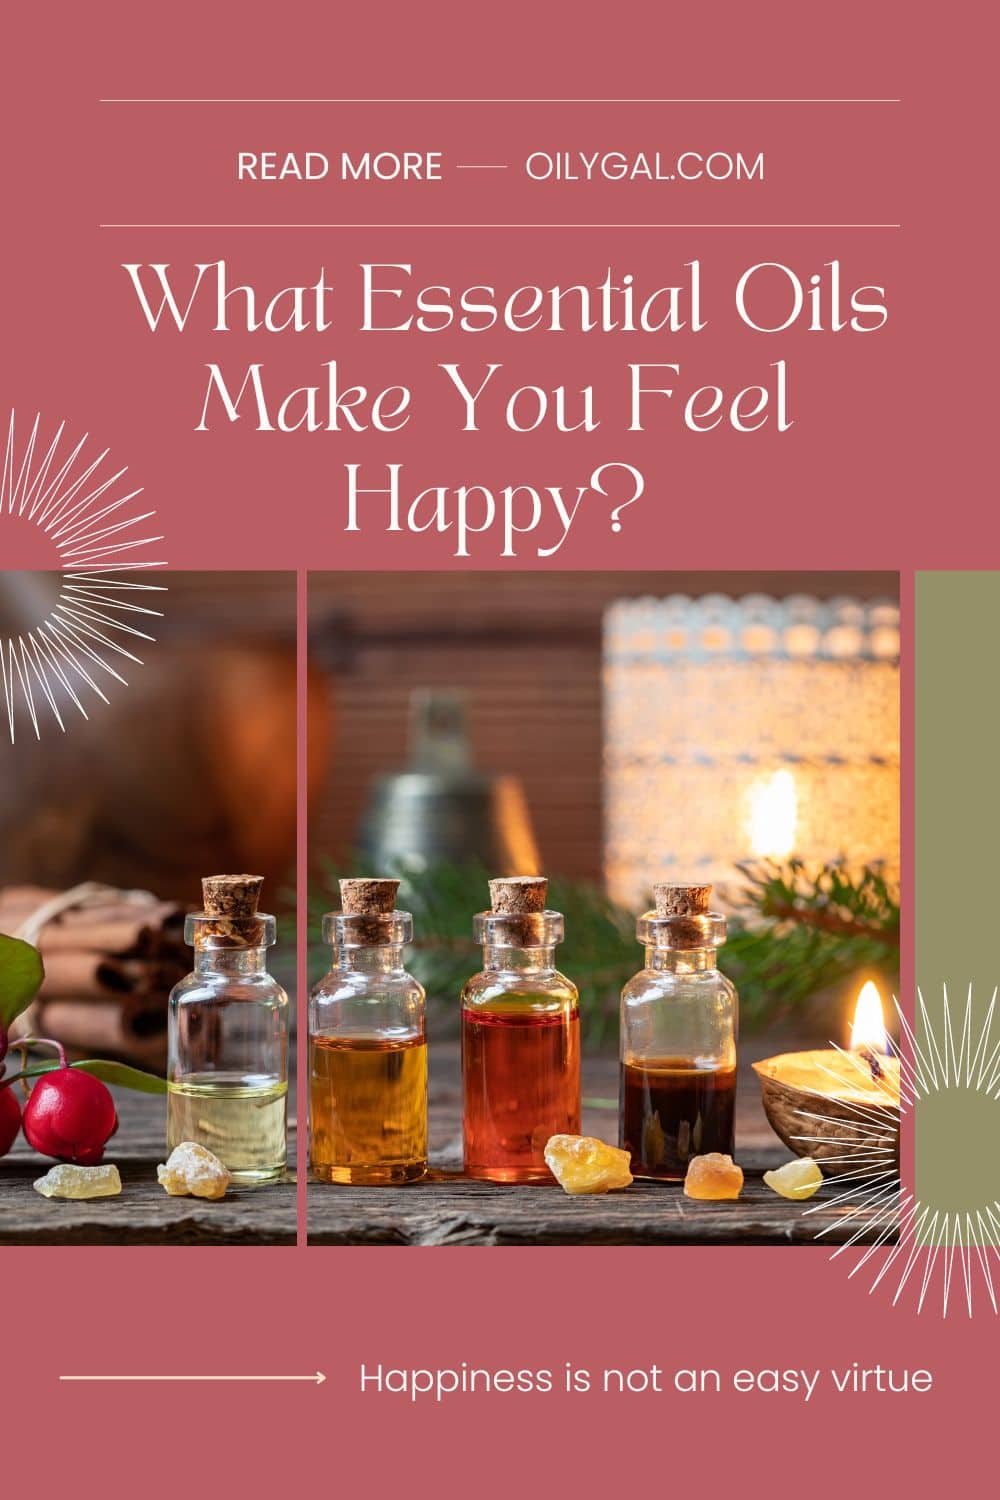 What Essential Oils Make You Feel Happy